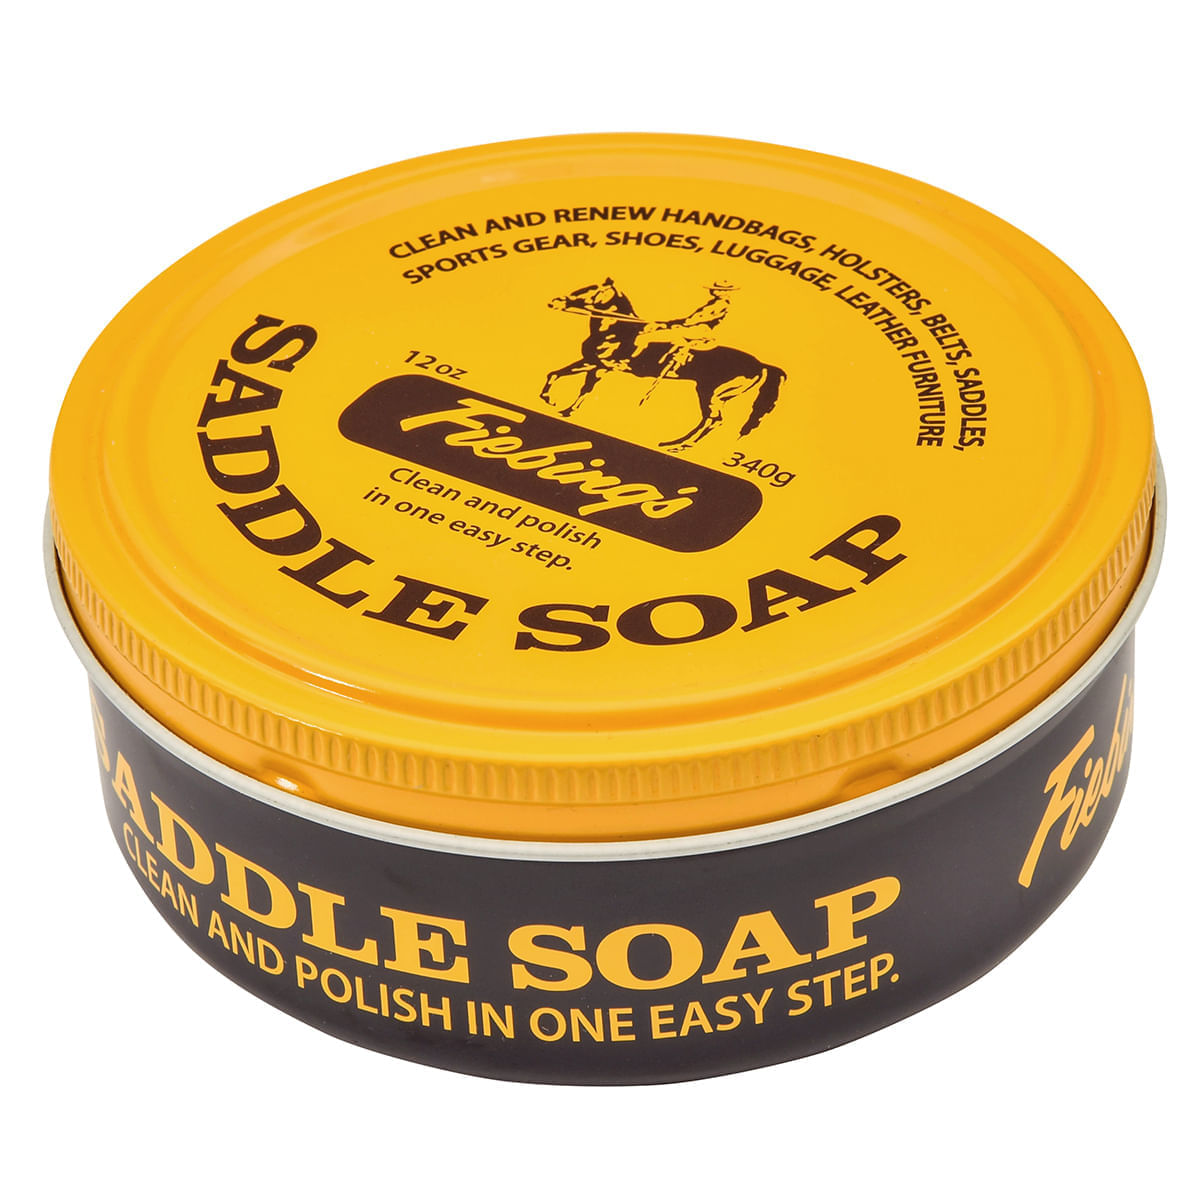 Fiebing's Saddle Soap Leather Cleaner, Conditioner (3.5 oz)